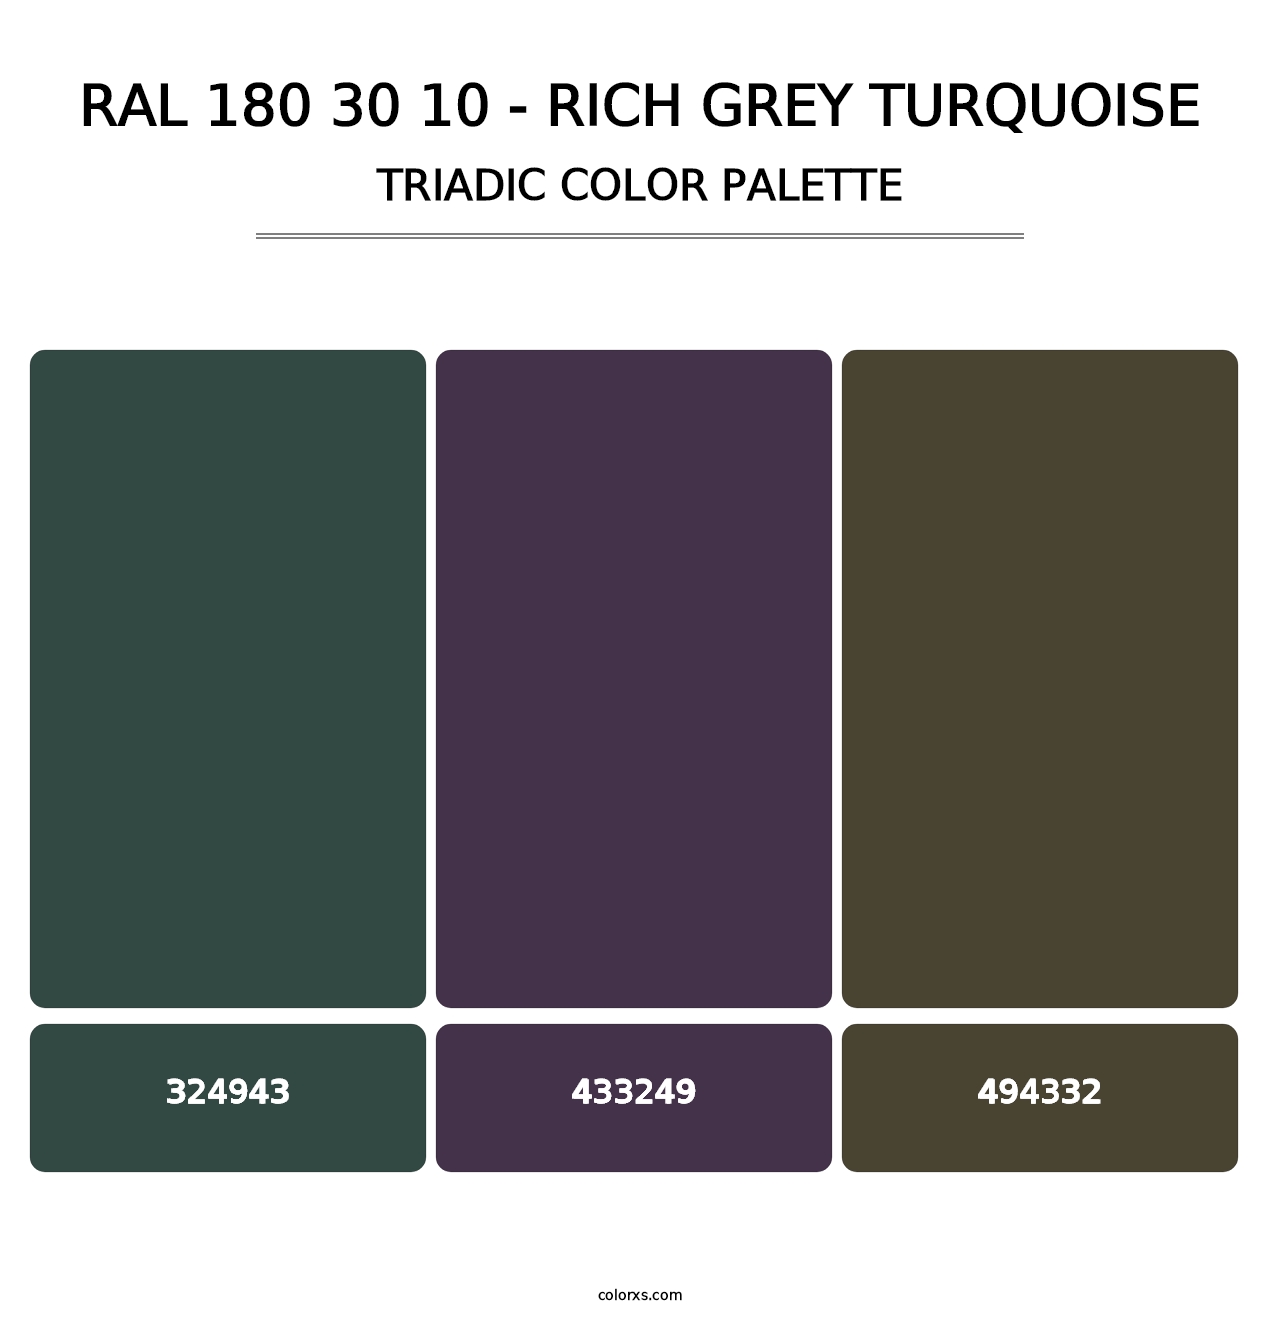 RAL 180 30 10 - Rich Grey Turquoise - Triadic Color Palette